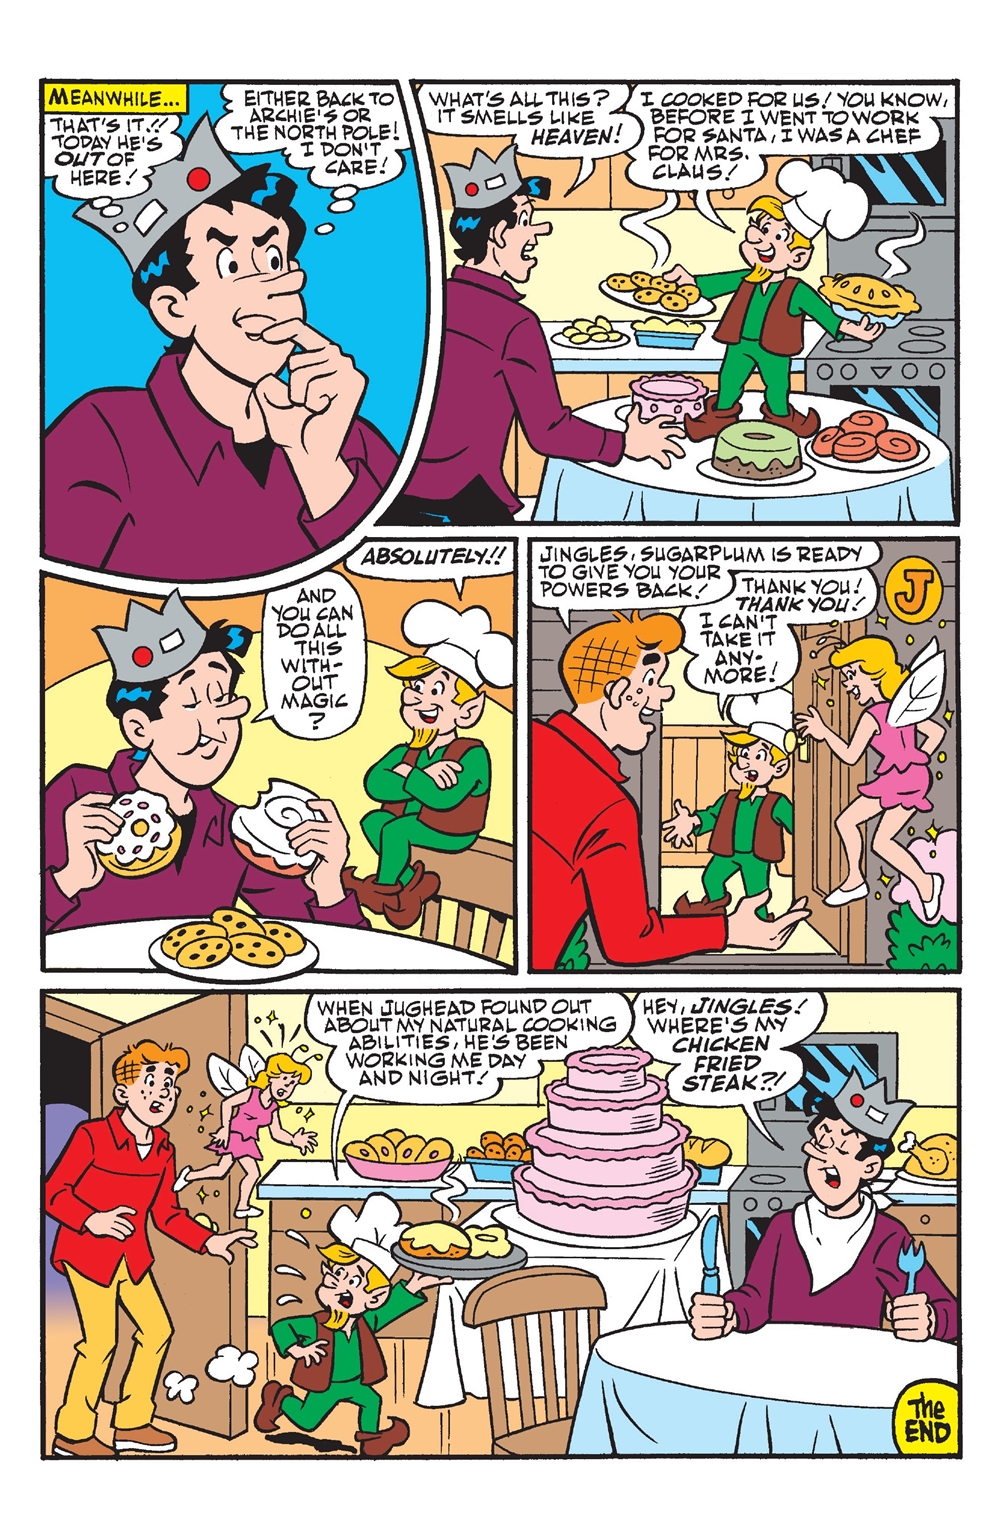 Archie%2527s%2BChristmas%2BSpectacular%2B%25282018%2529-021